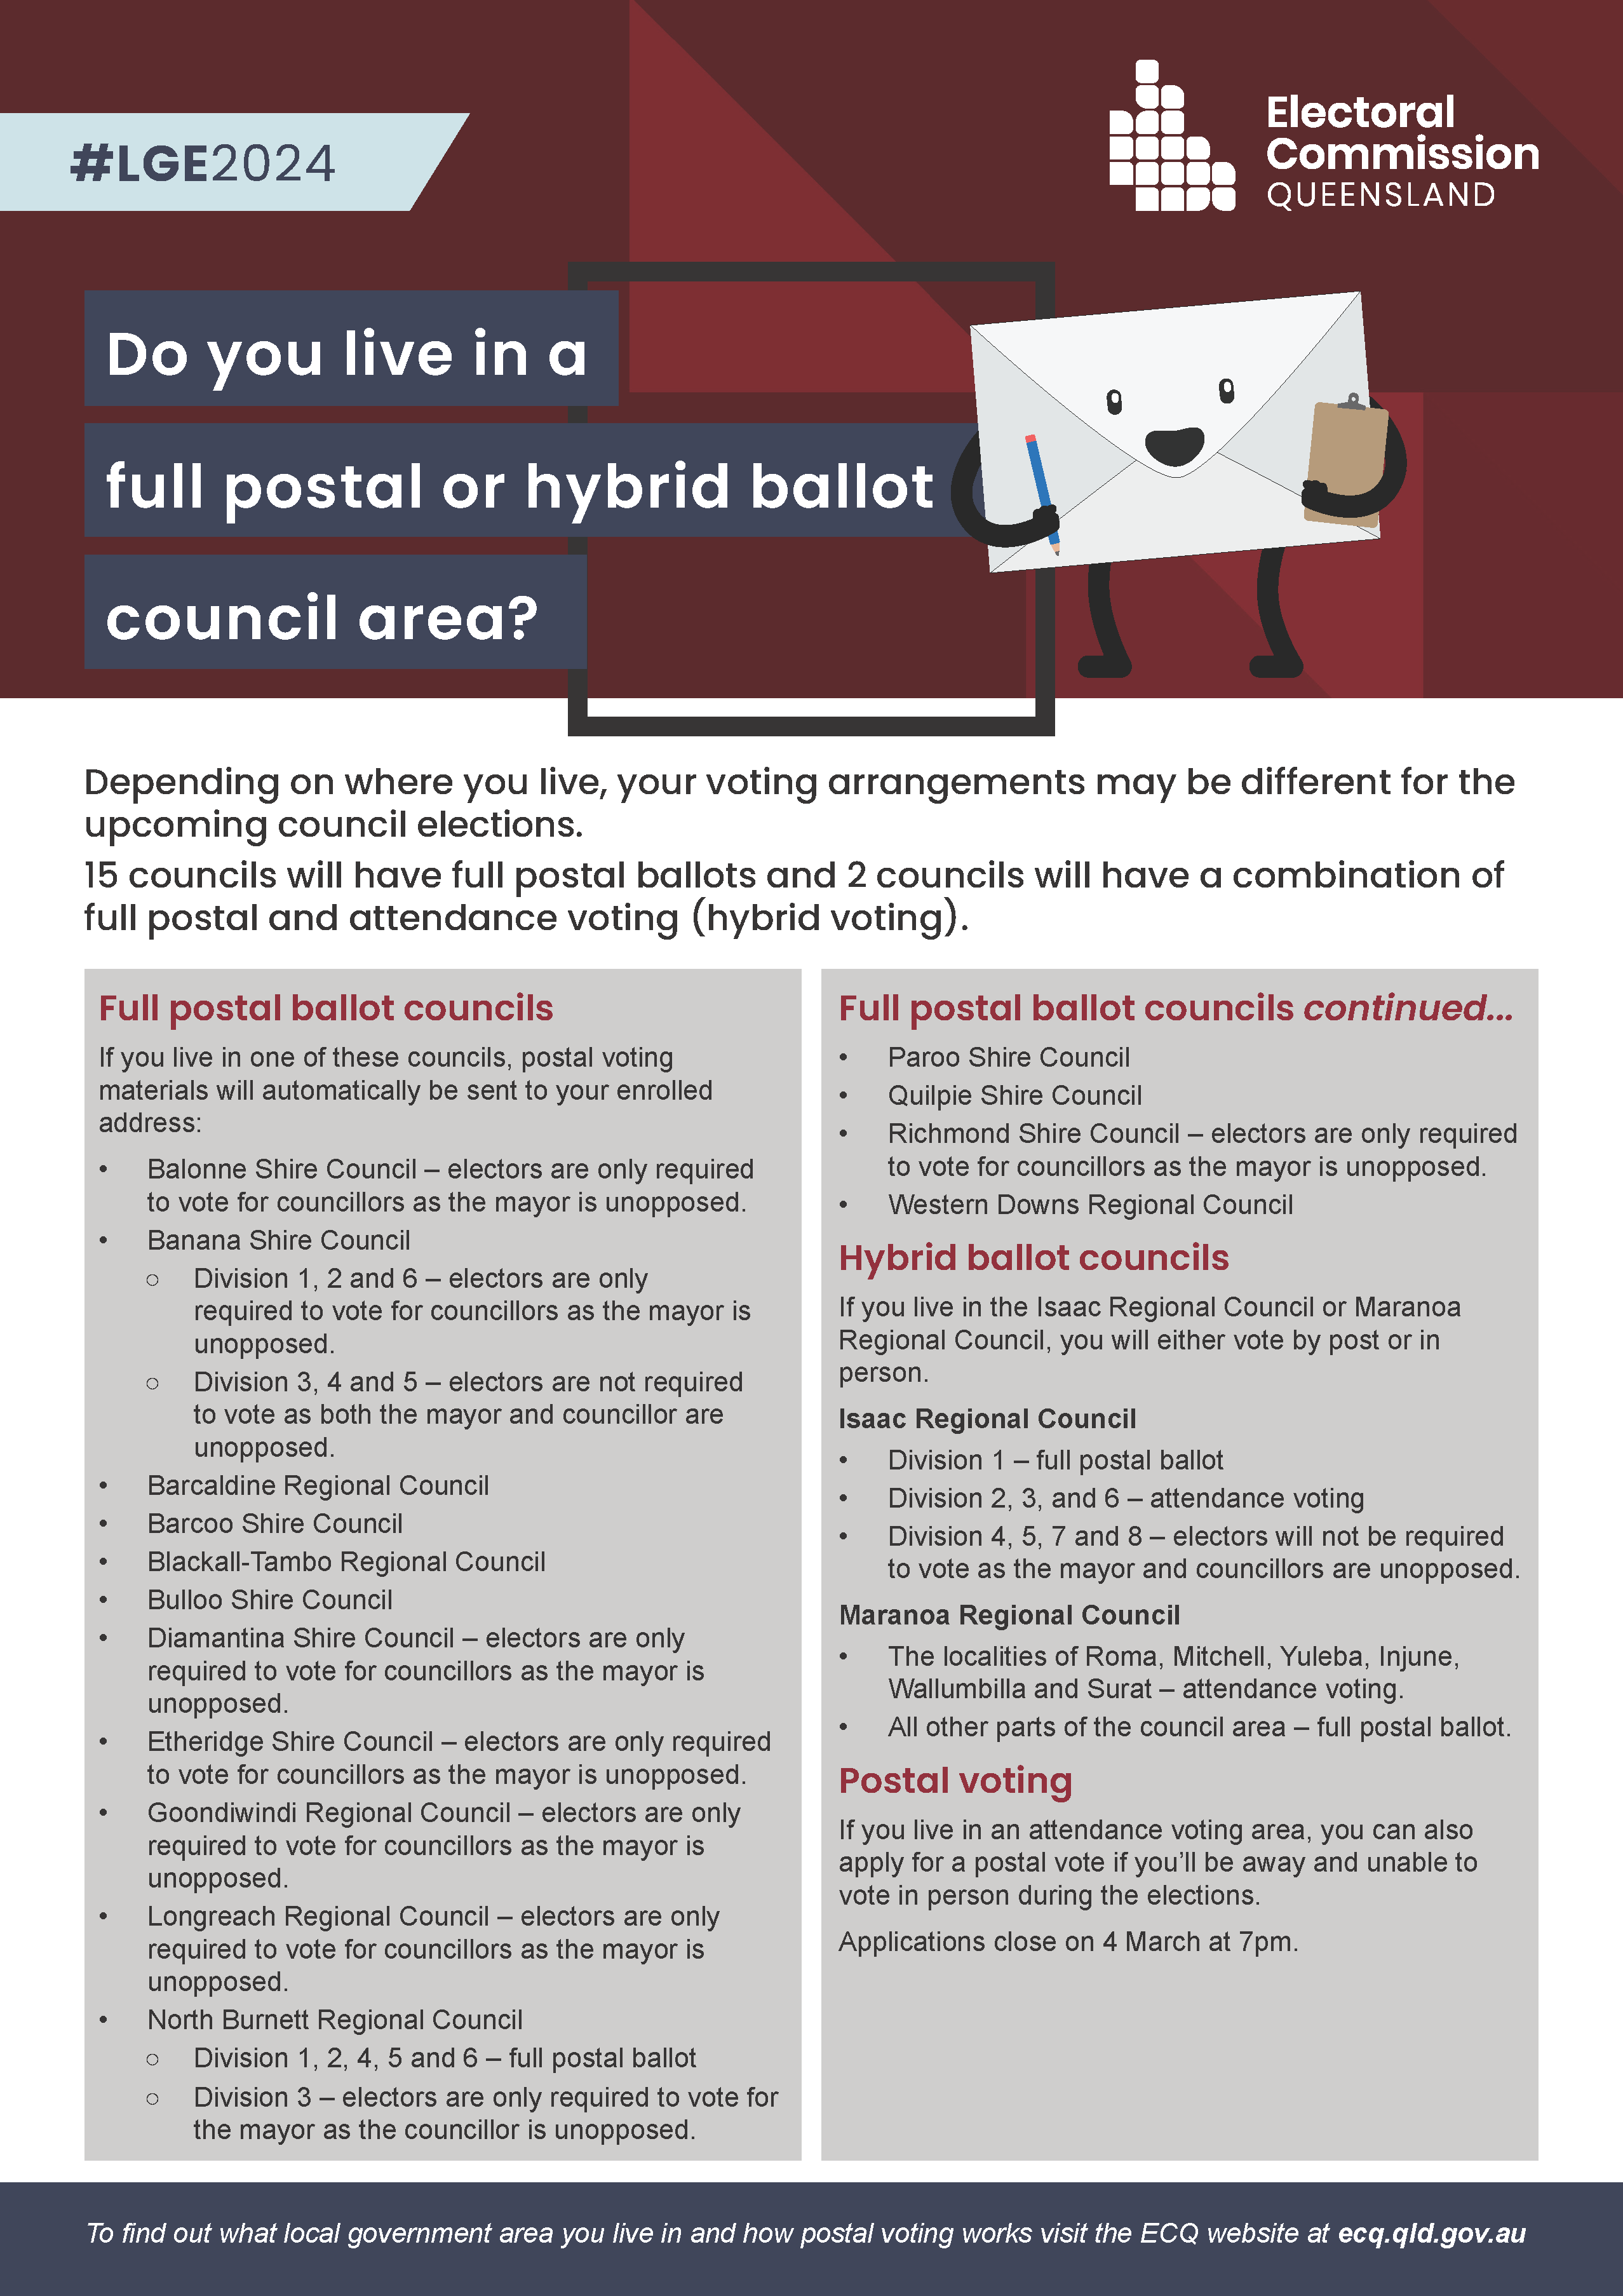 Banana Shire Local Government Elections

Please find below the Electoral Commission of Queensland guidance on the local government elections in Banana Shire. Flyers will also be available on Council’s Facebook Page.

Residents in Moura, Thangool, Wowan, B